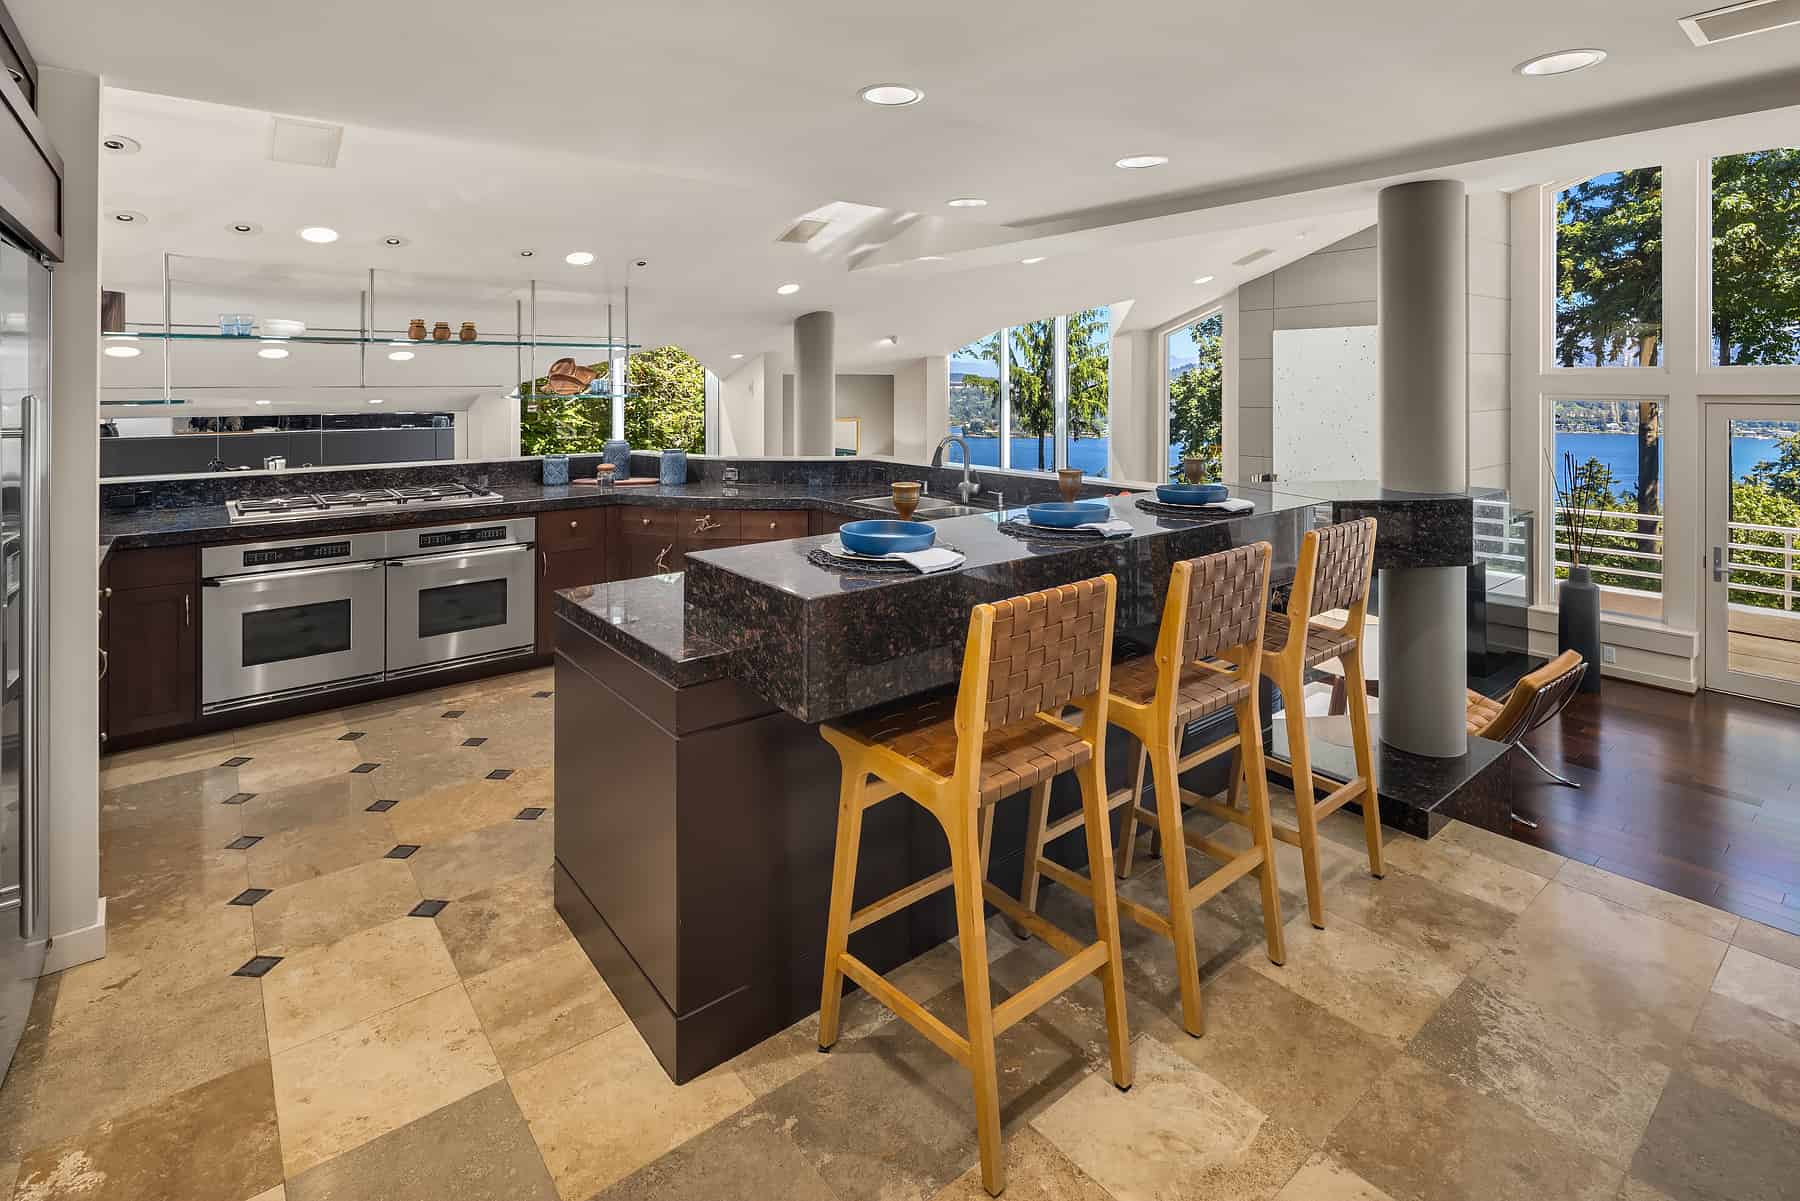 kitchens with tile floors